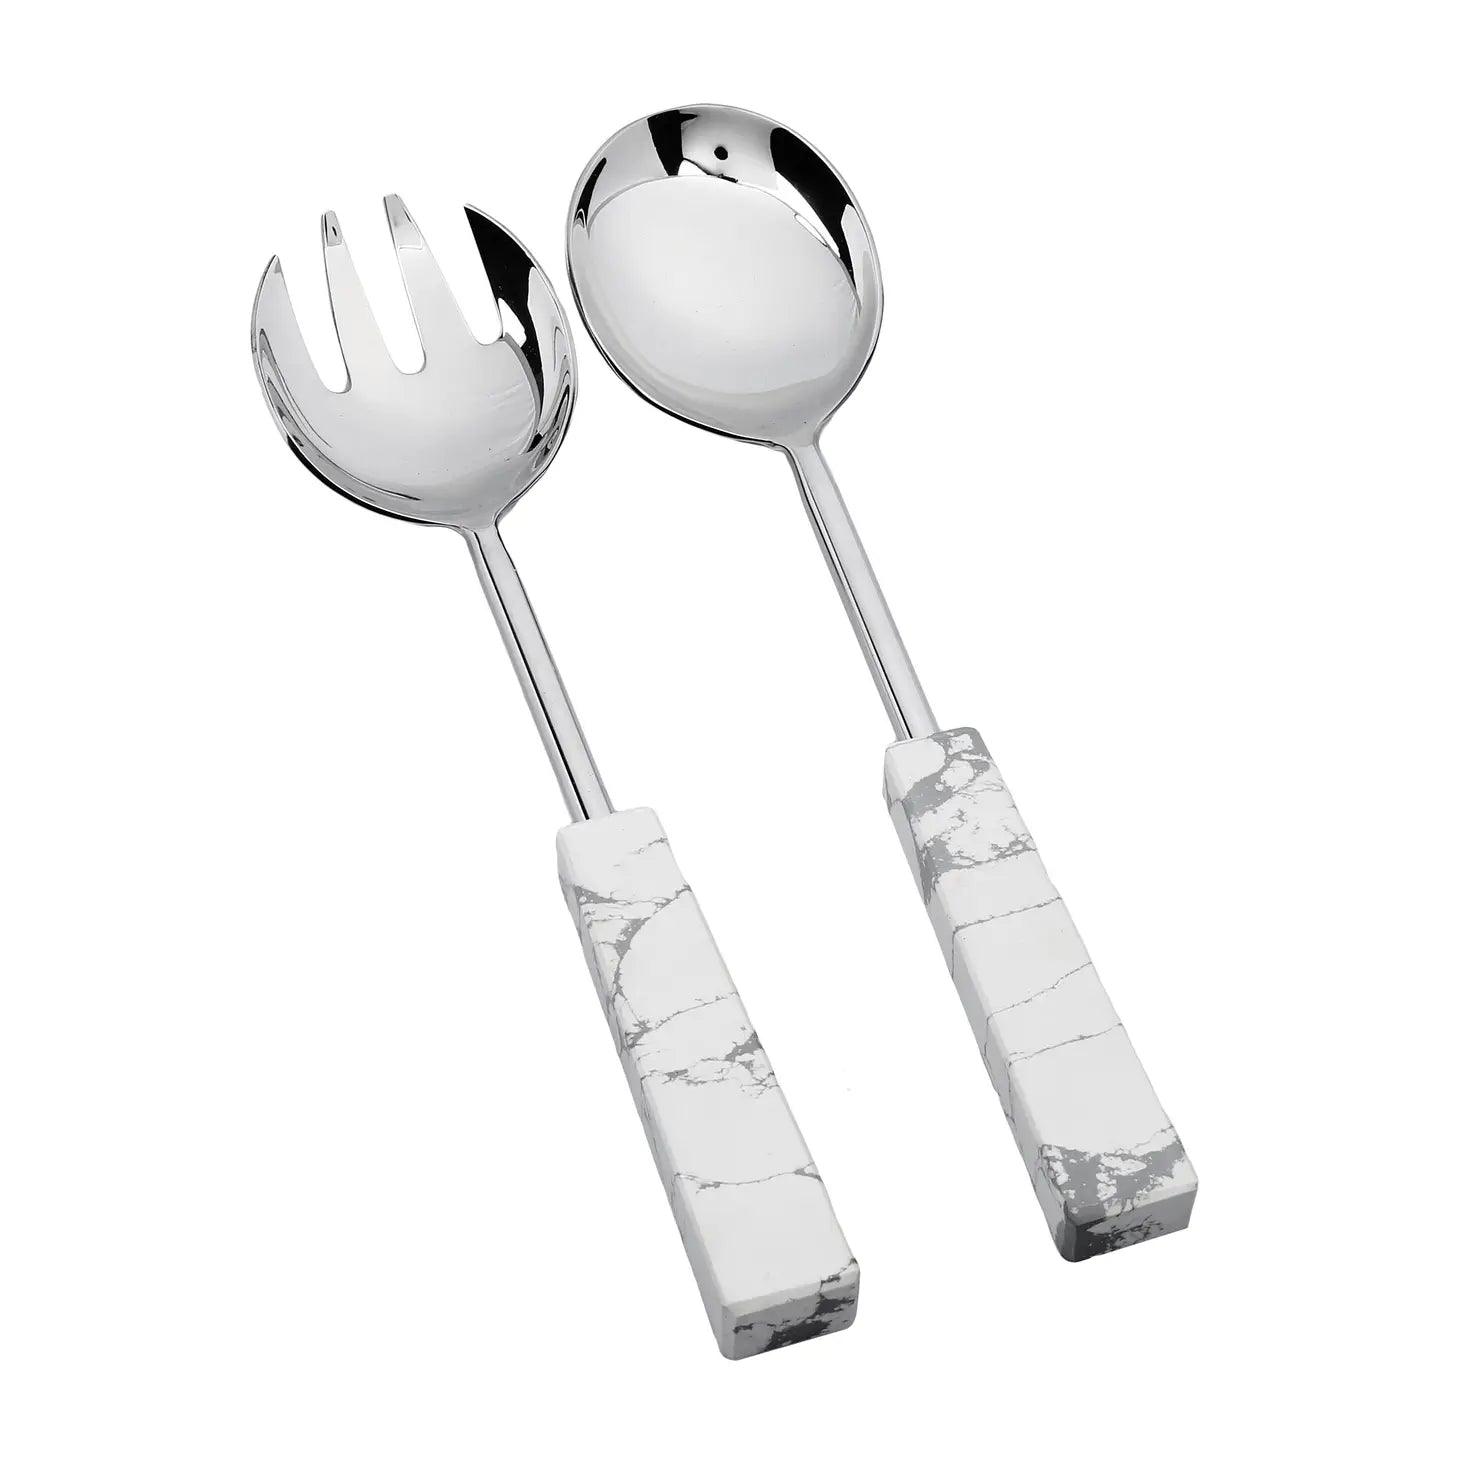 Stainless Steel Salad Servers with Marble Handles